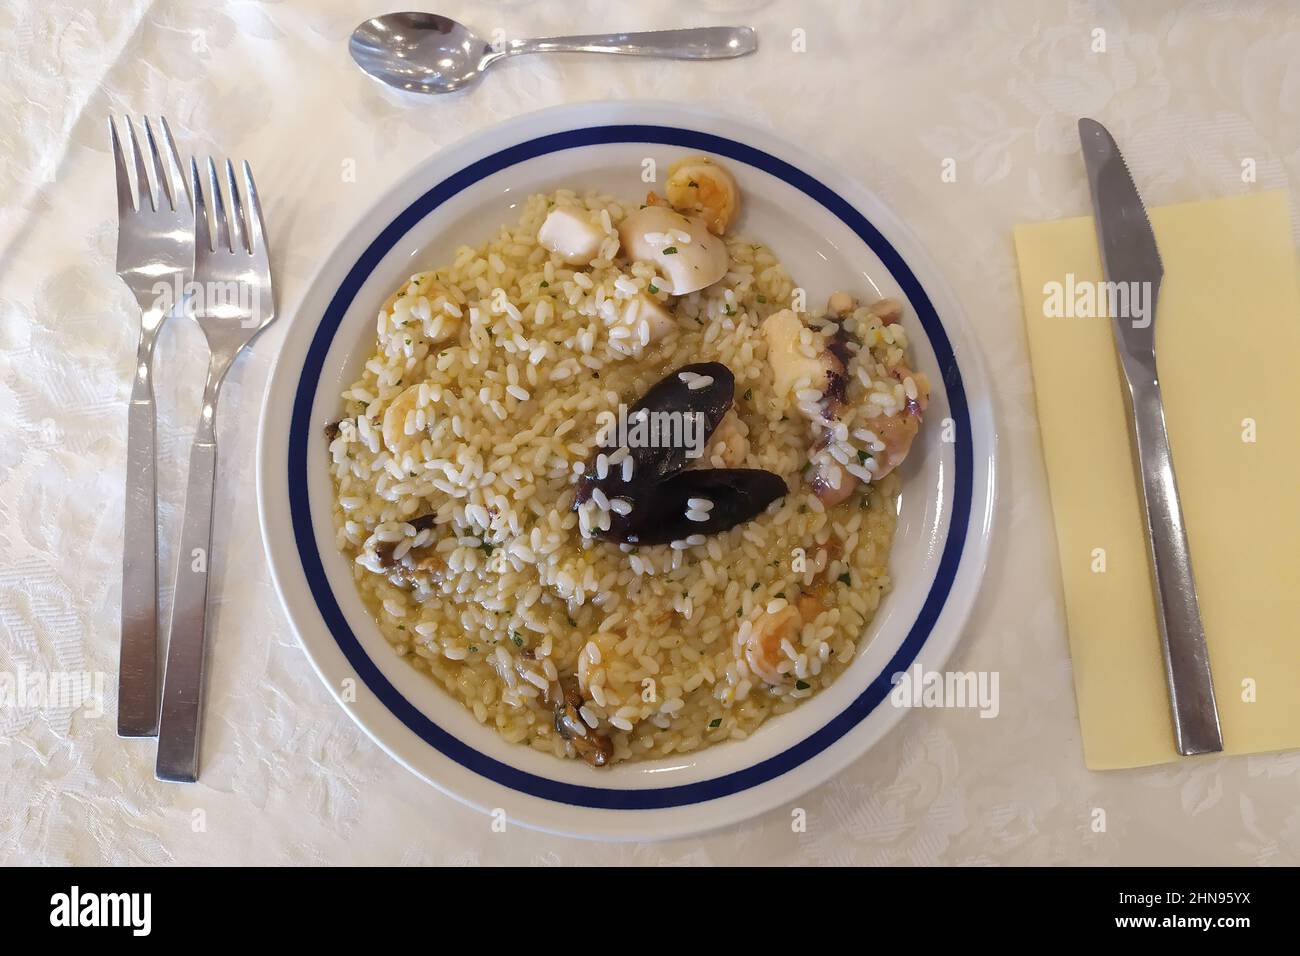 Food, First Course, Risotto with Seafood Stock Photo